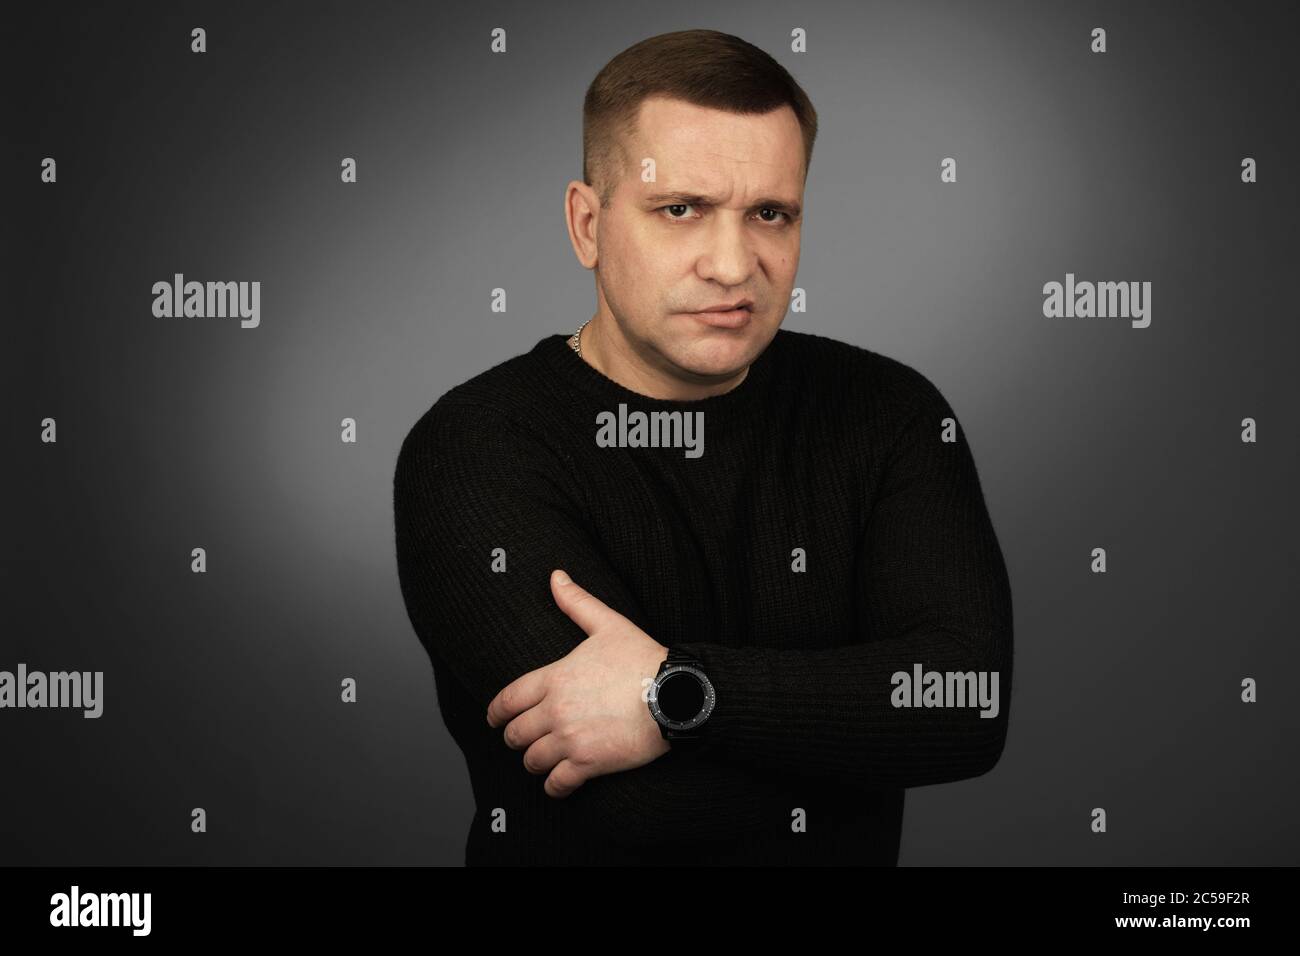 middle aged guy with disgust emotion on his face. Studio shot over grey background Stock Photo